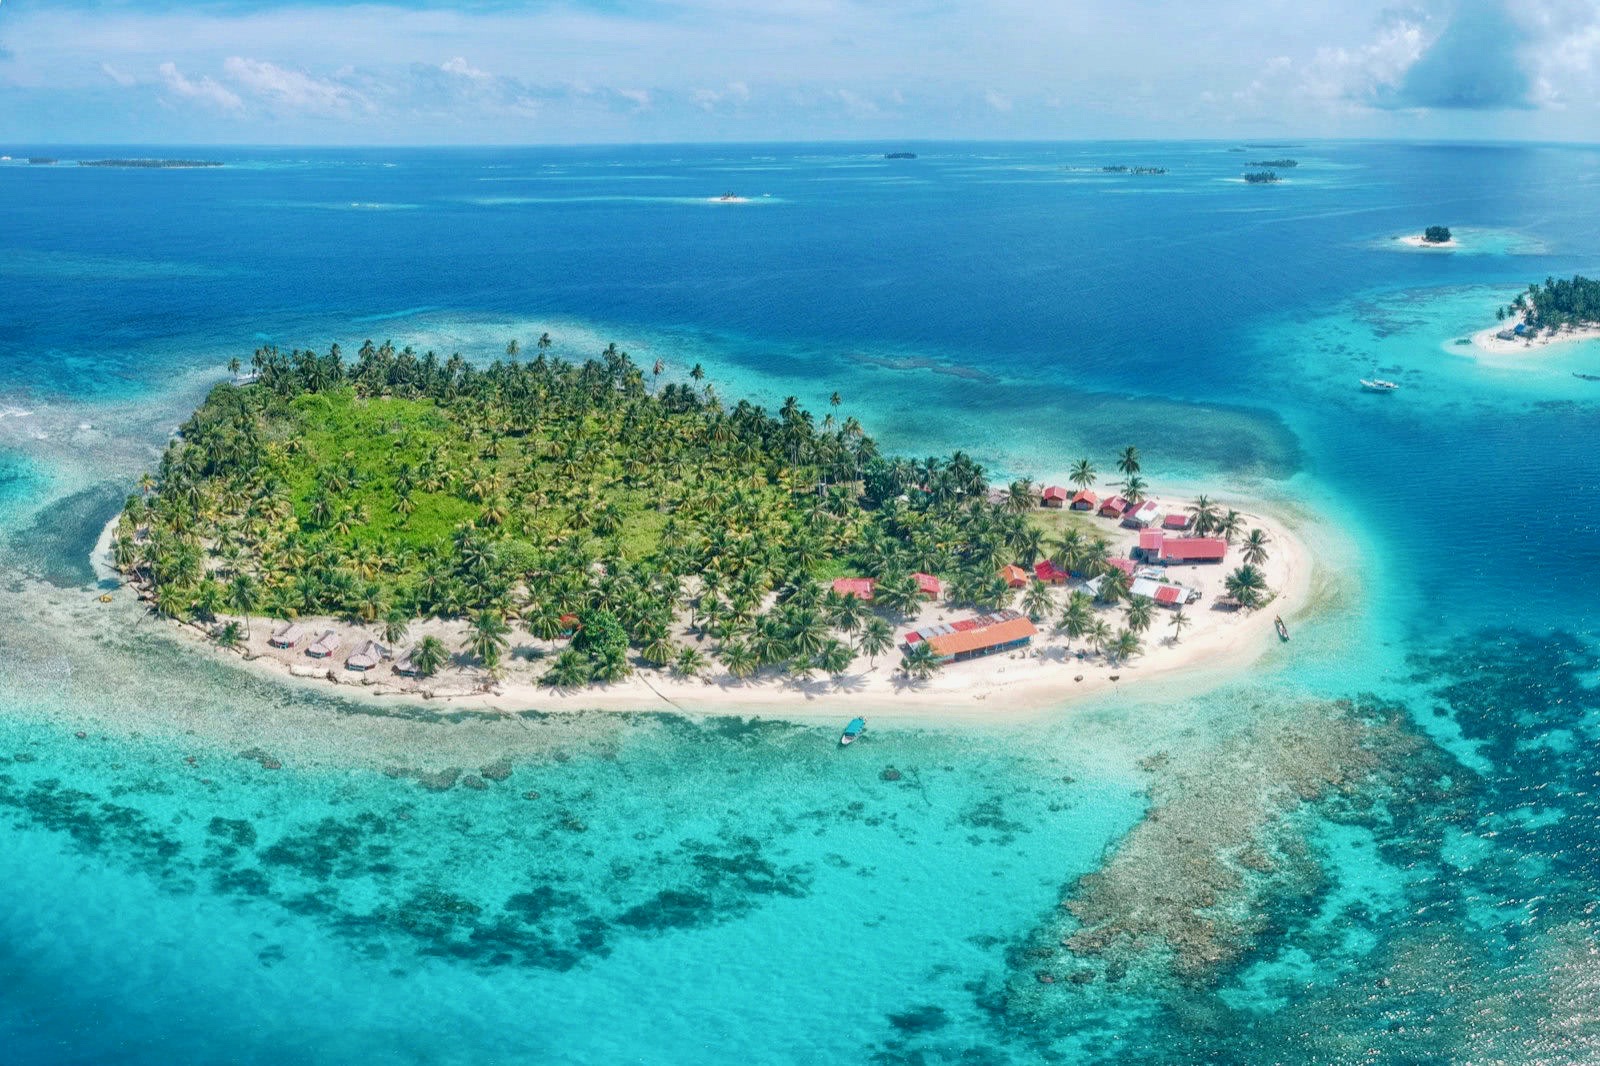 San Blas isla diablo drone view with turquoise ocean and reefs